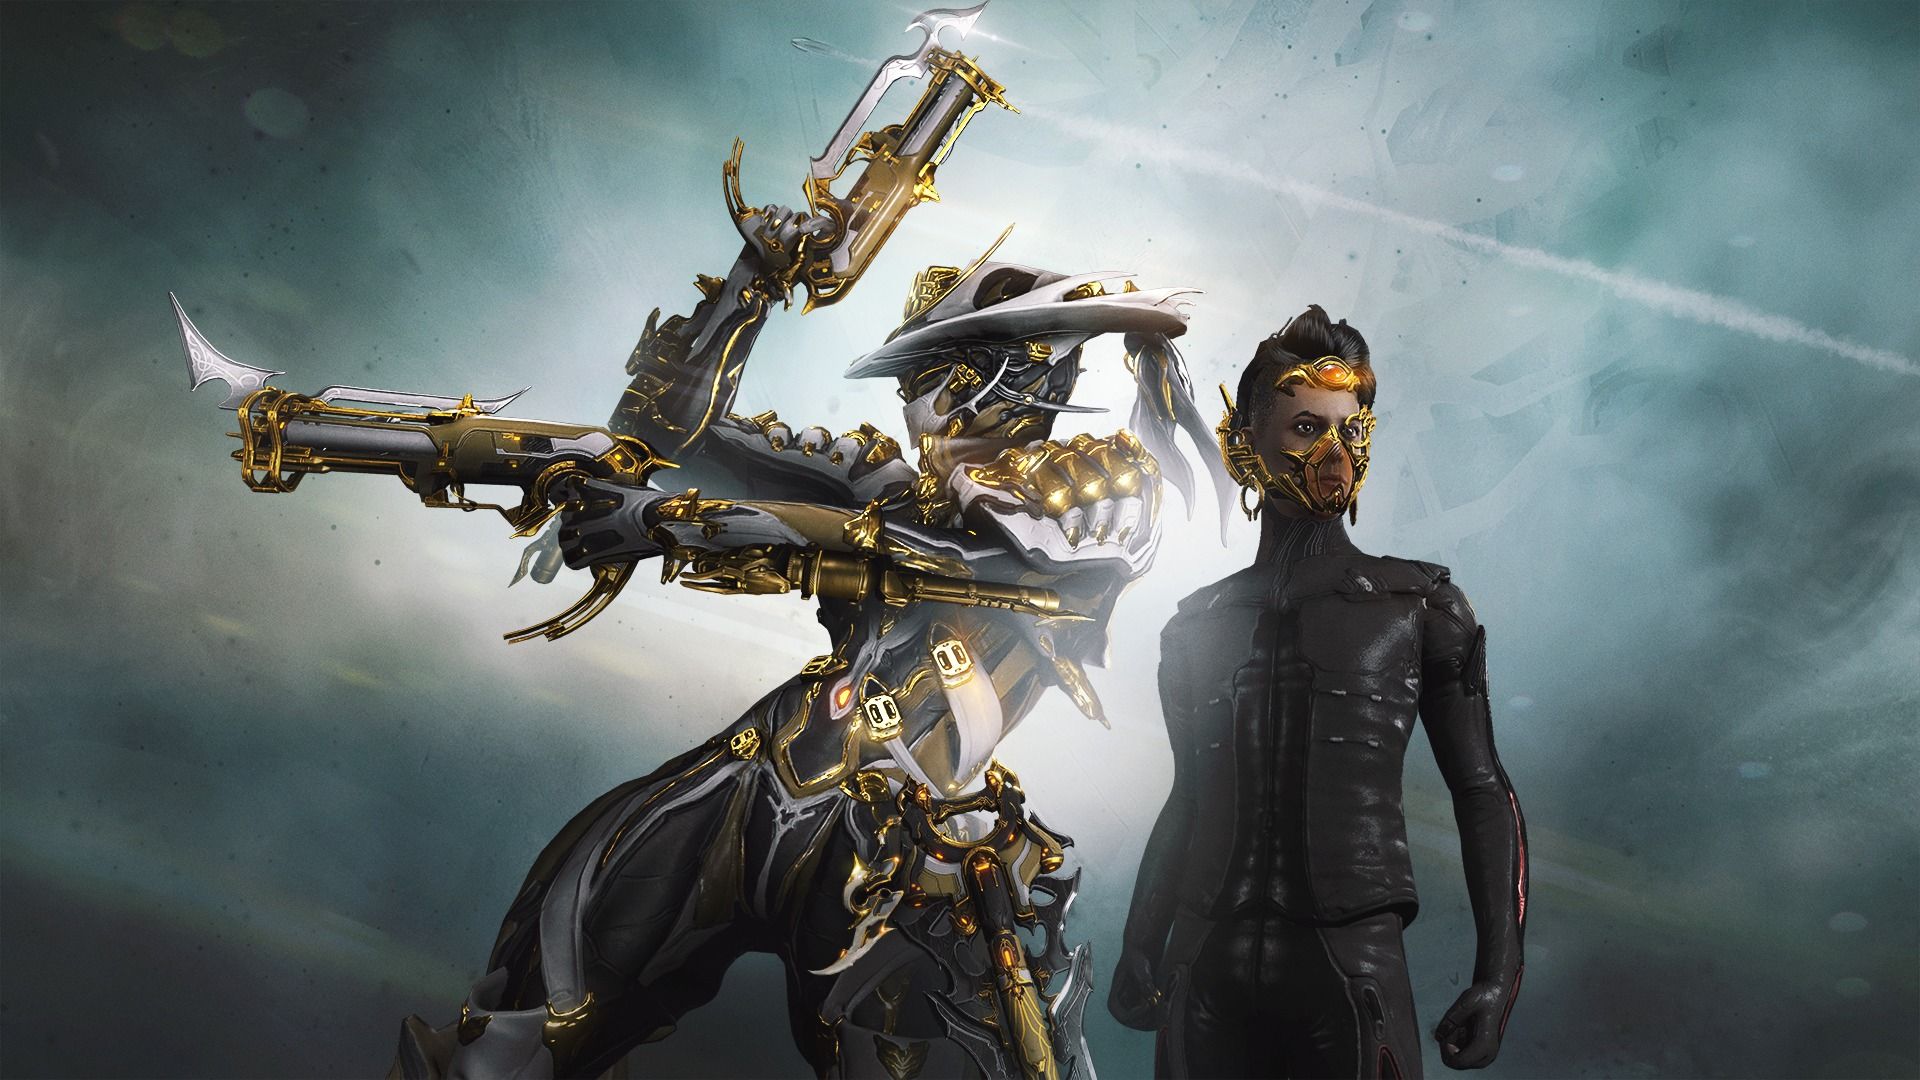 Buy cheap Warframe Mesa Prime Access: Peacemaker Pack cd key at the best price